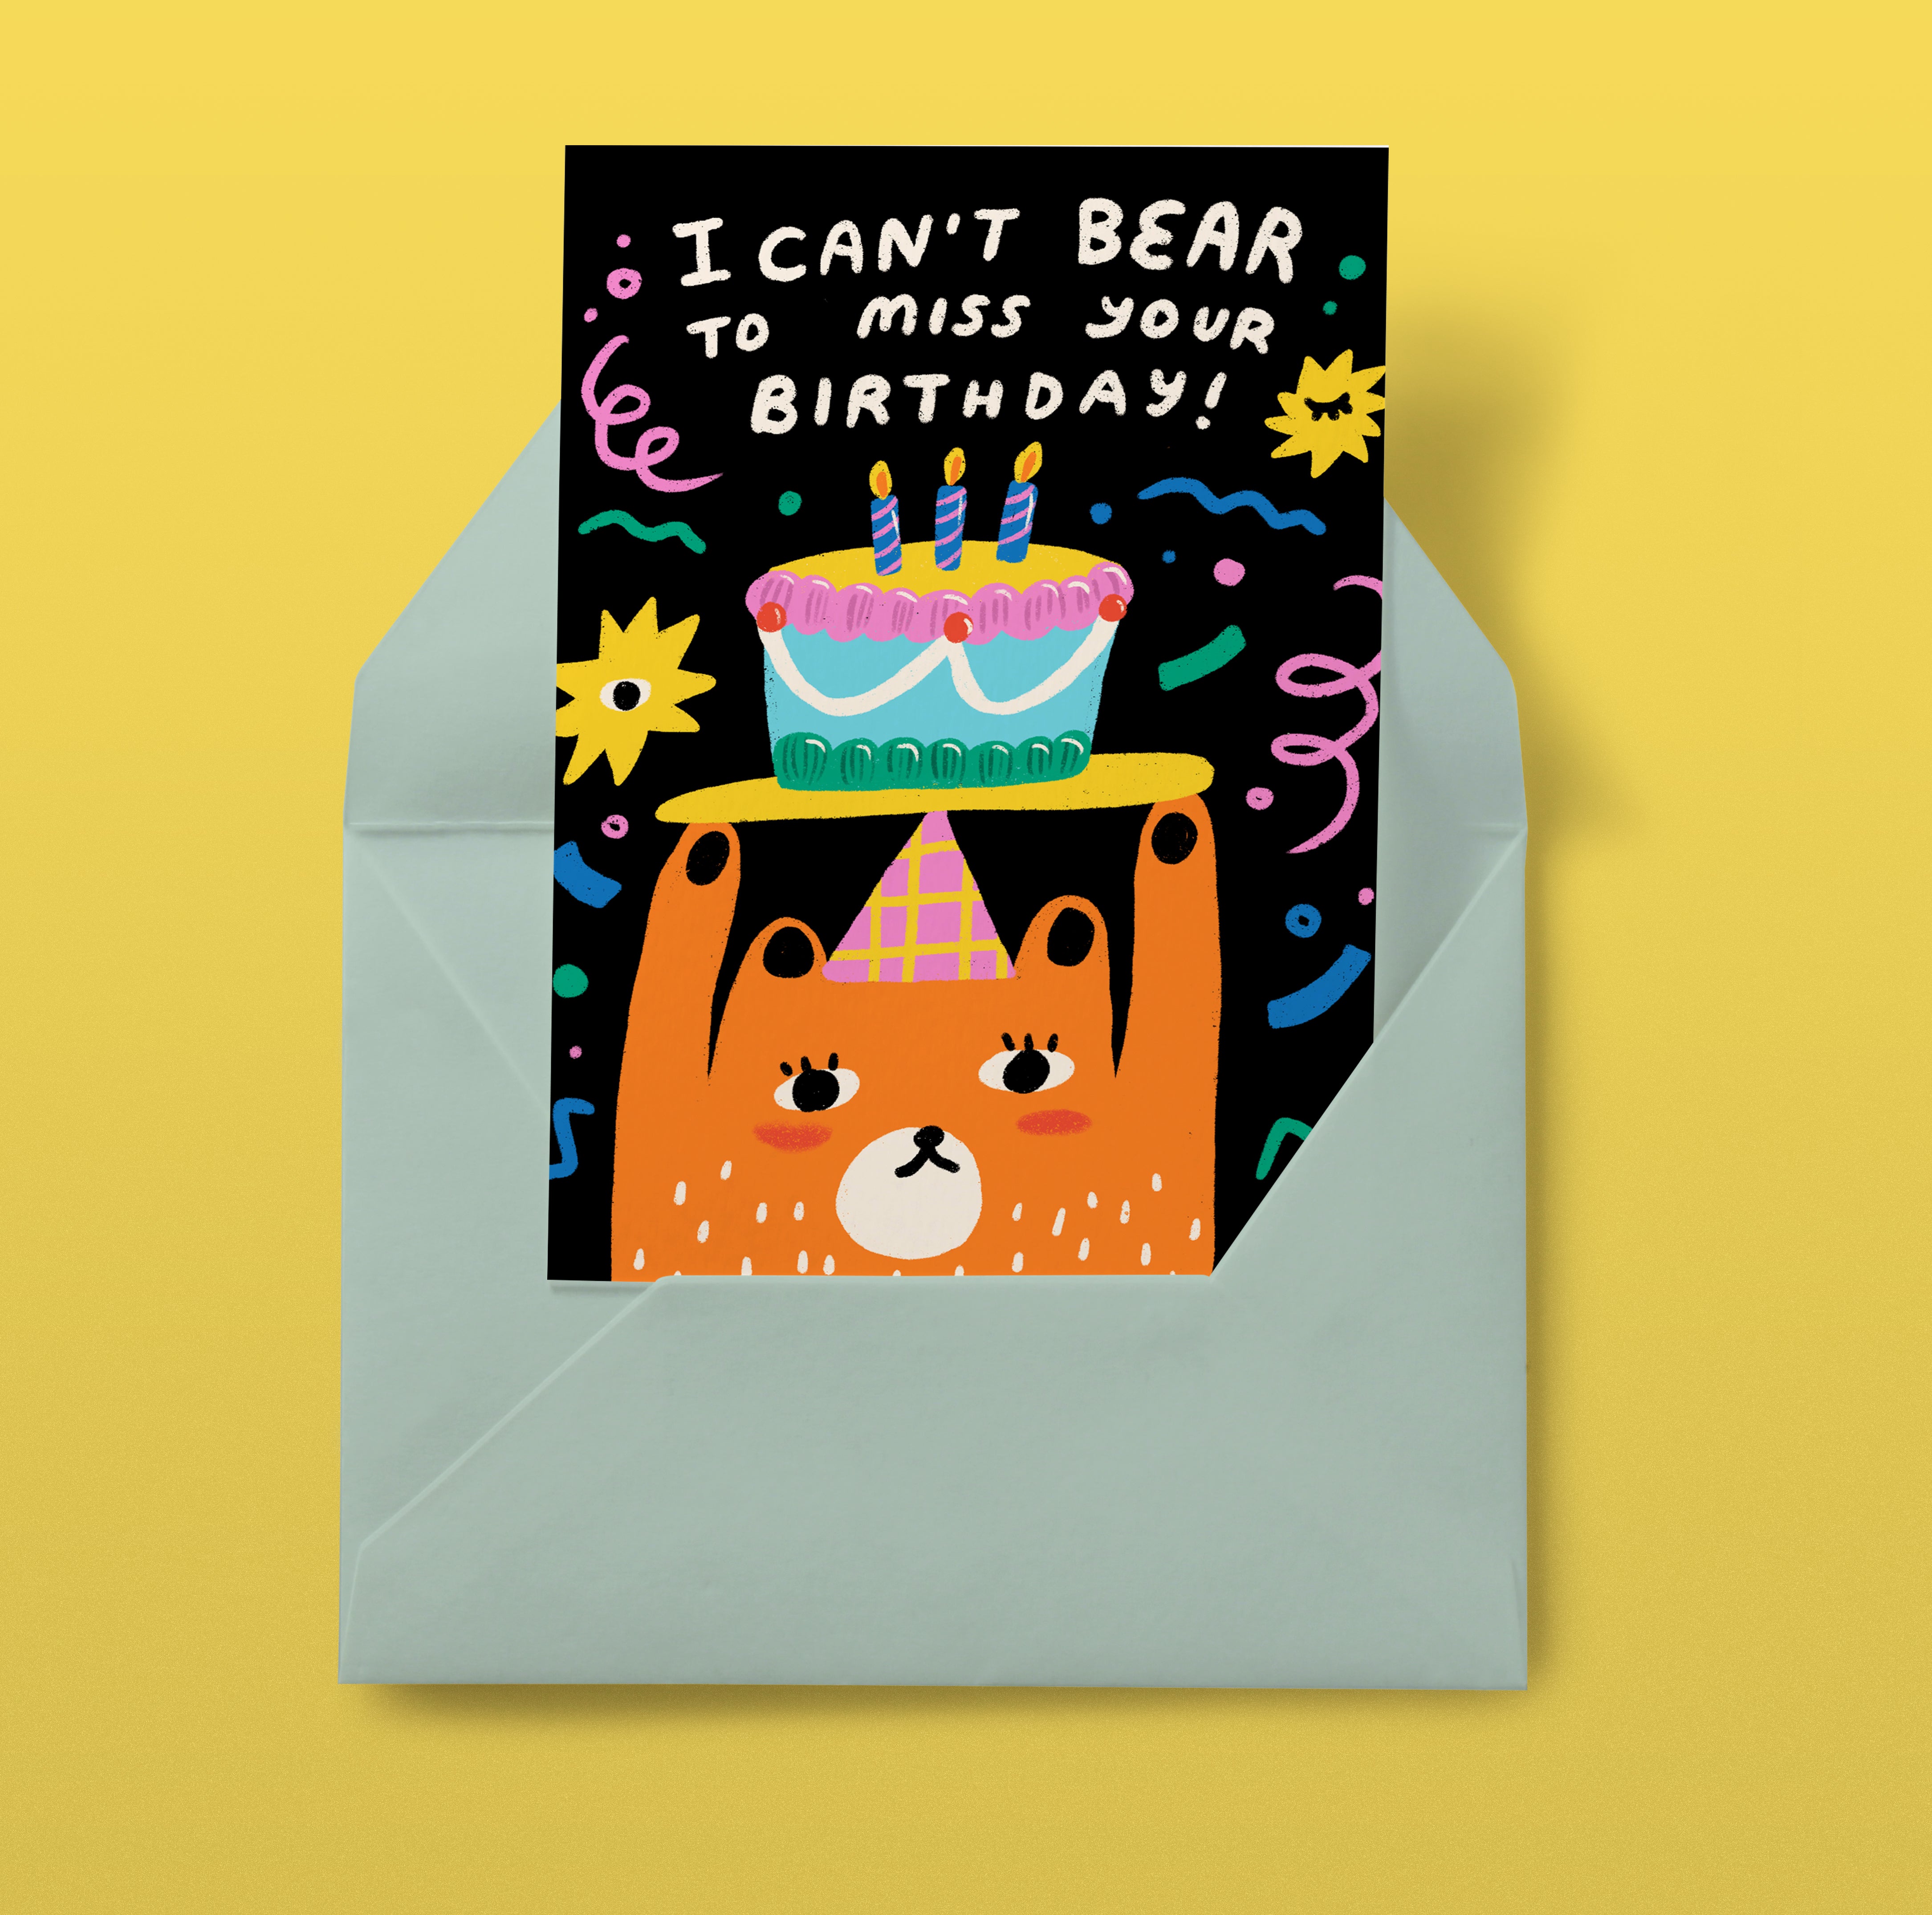 Greeting Cards (Mossery collaboration)